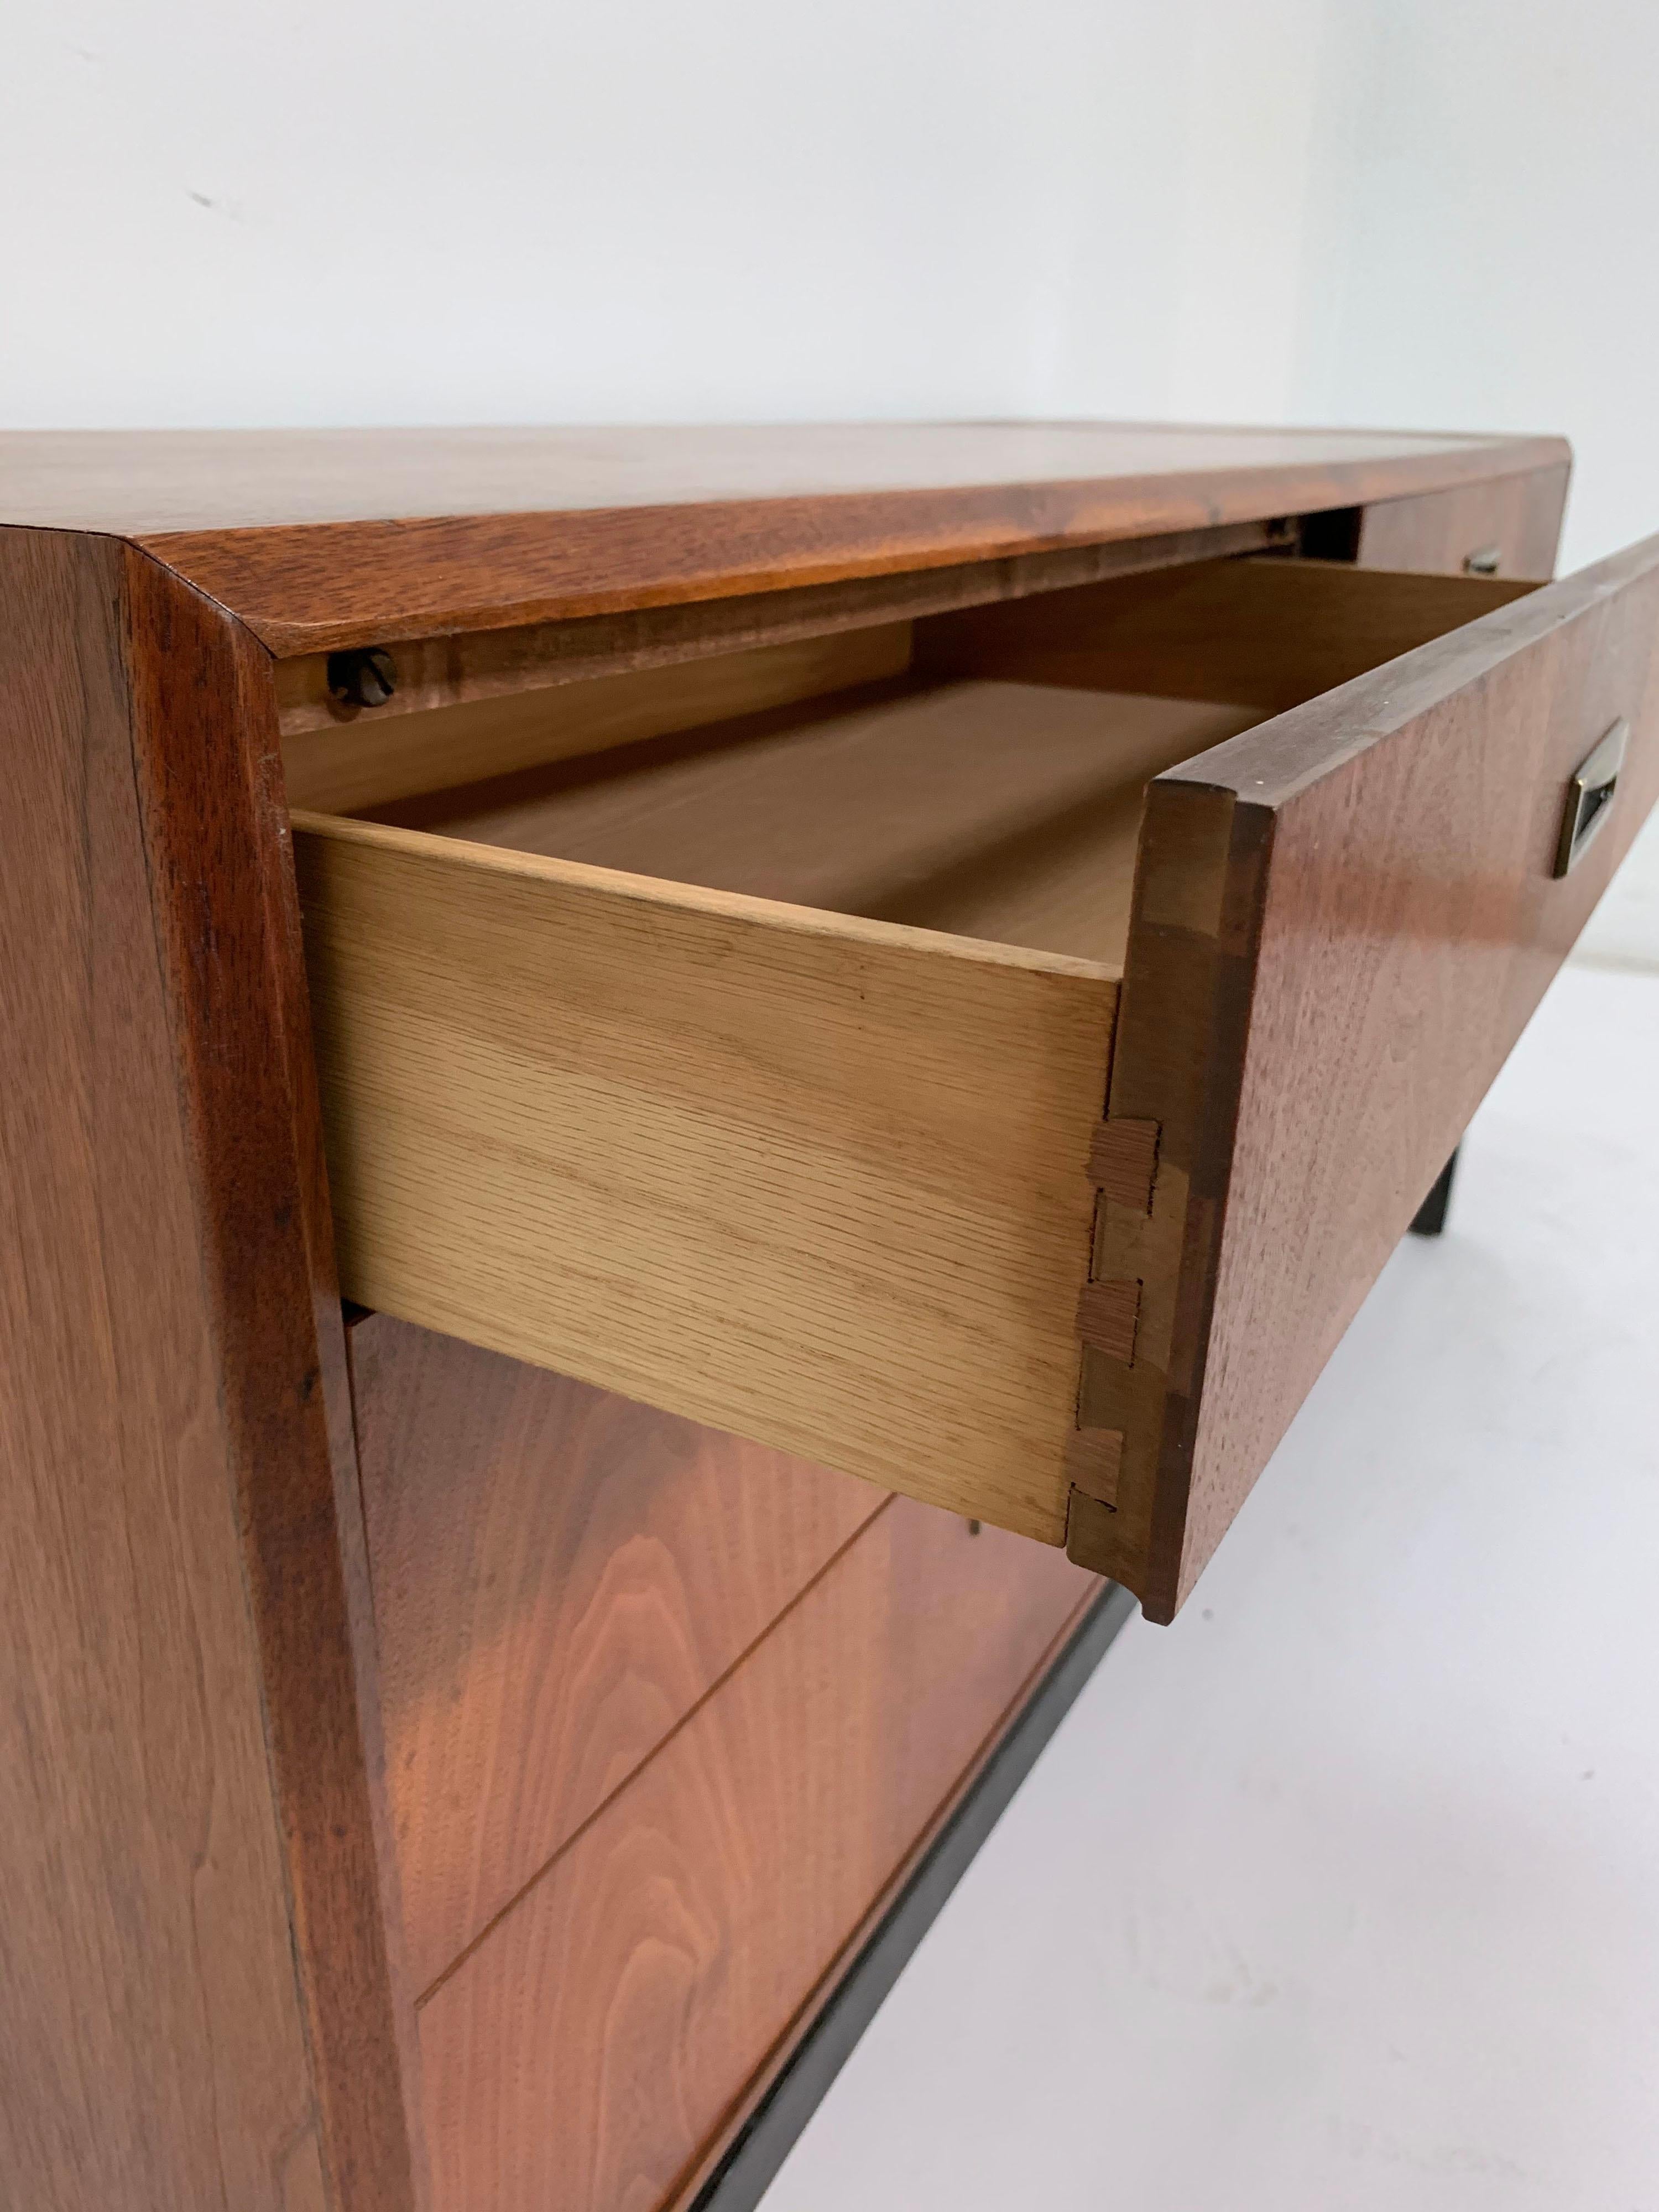 Midcentury Six-Drawer Walnut Dresser by Jack Cartwright for Founders circa 1970s 7